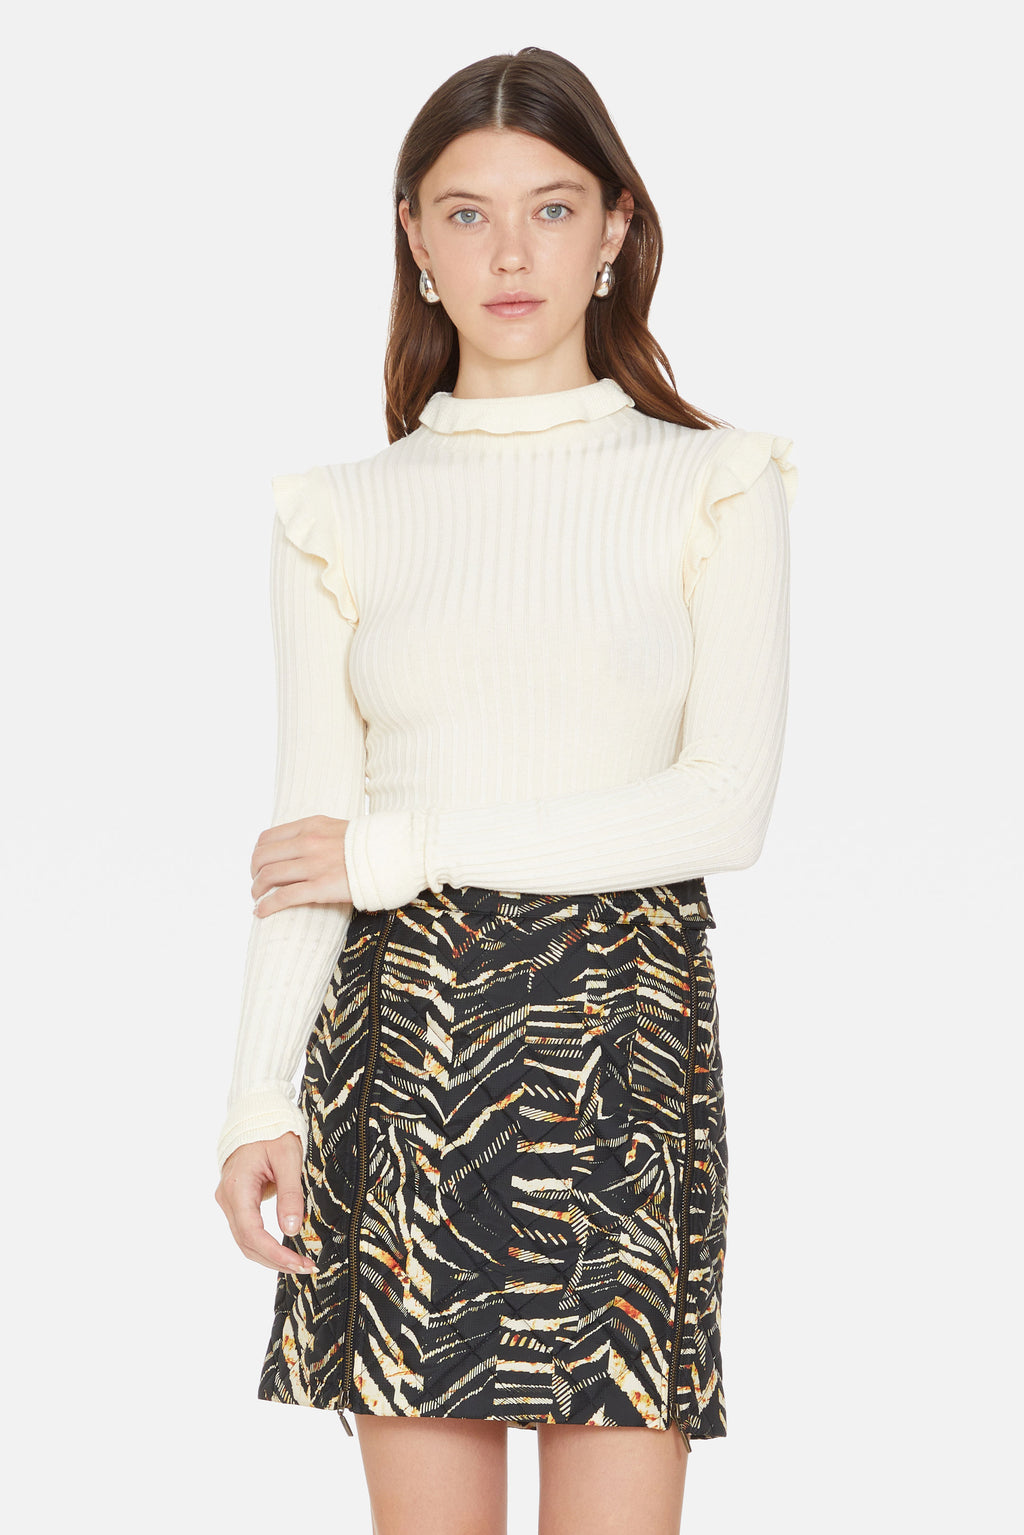 White turtleneck with ruffle details on shoulders and neck